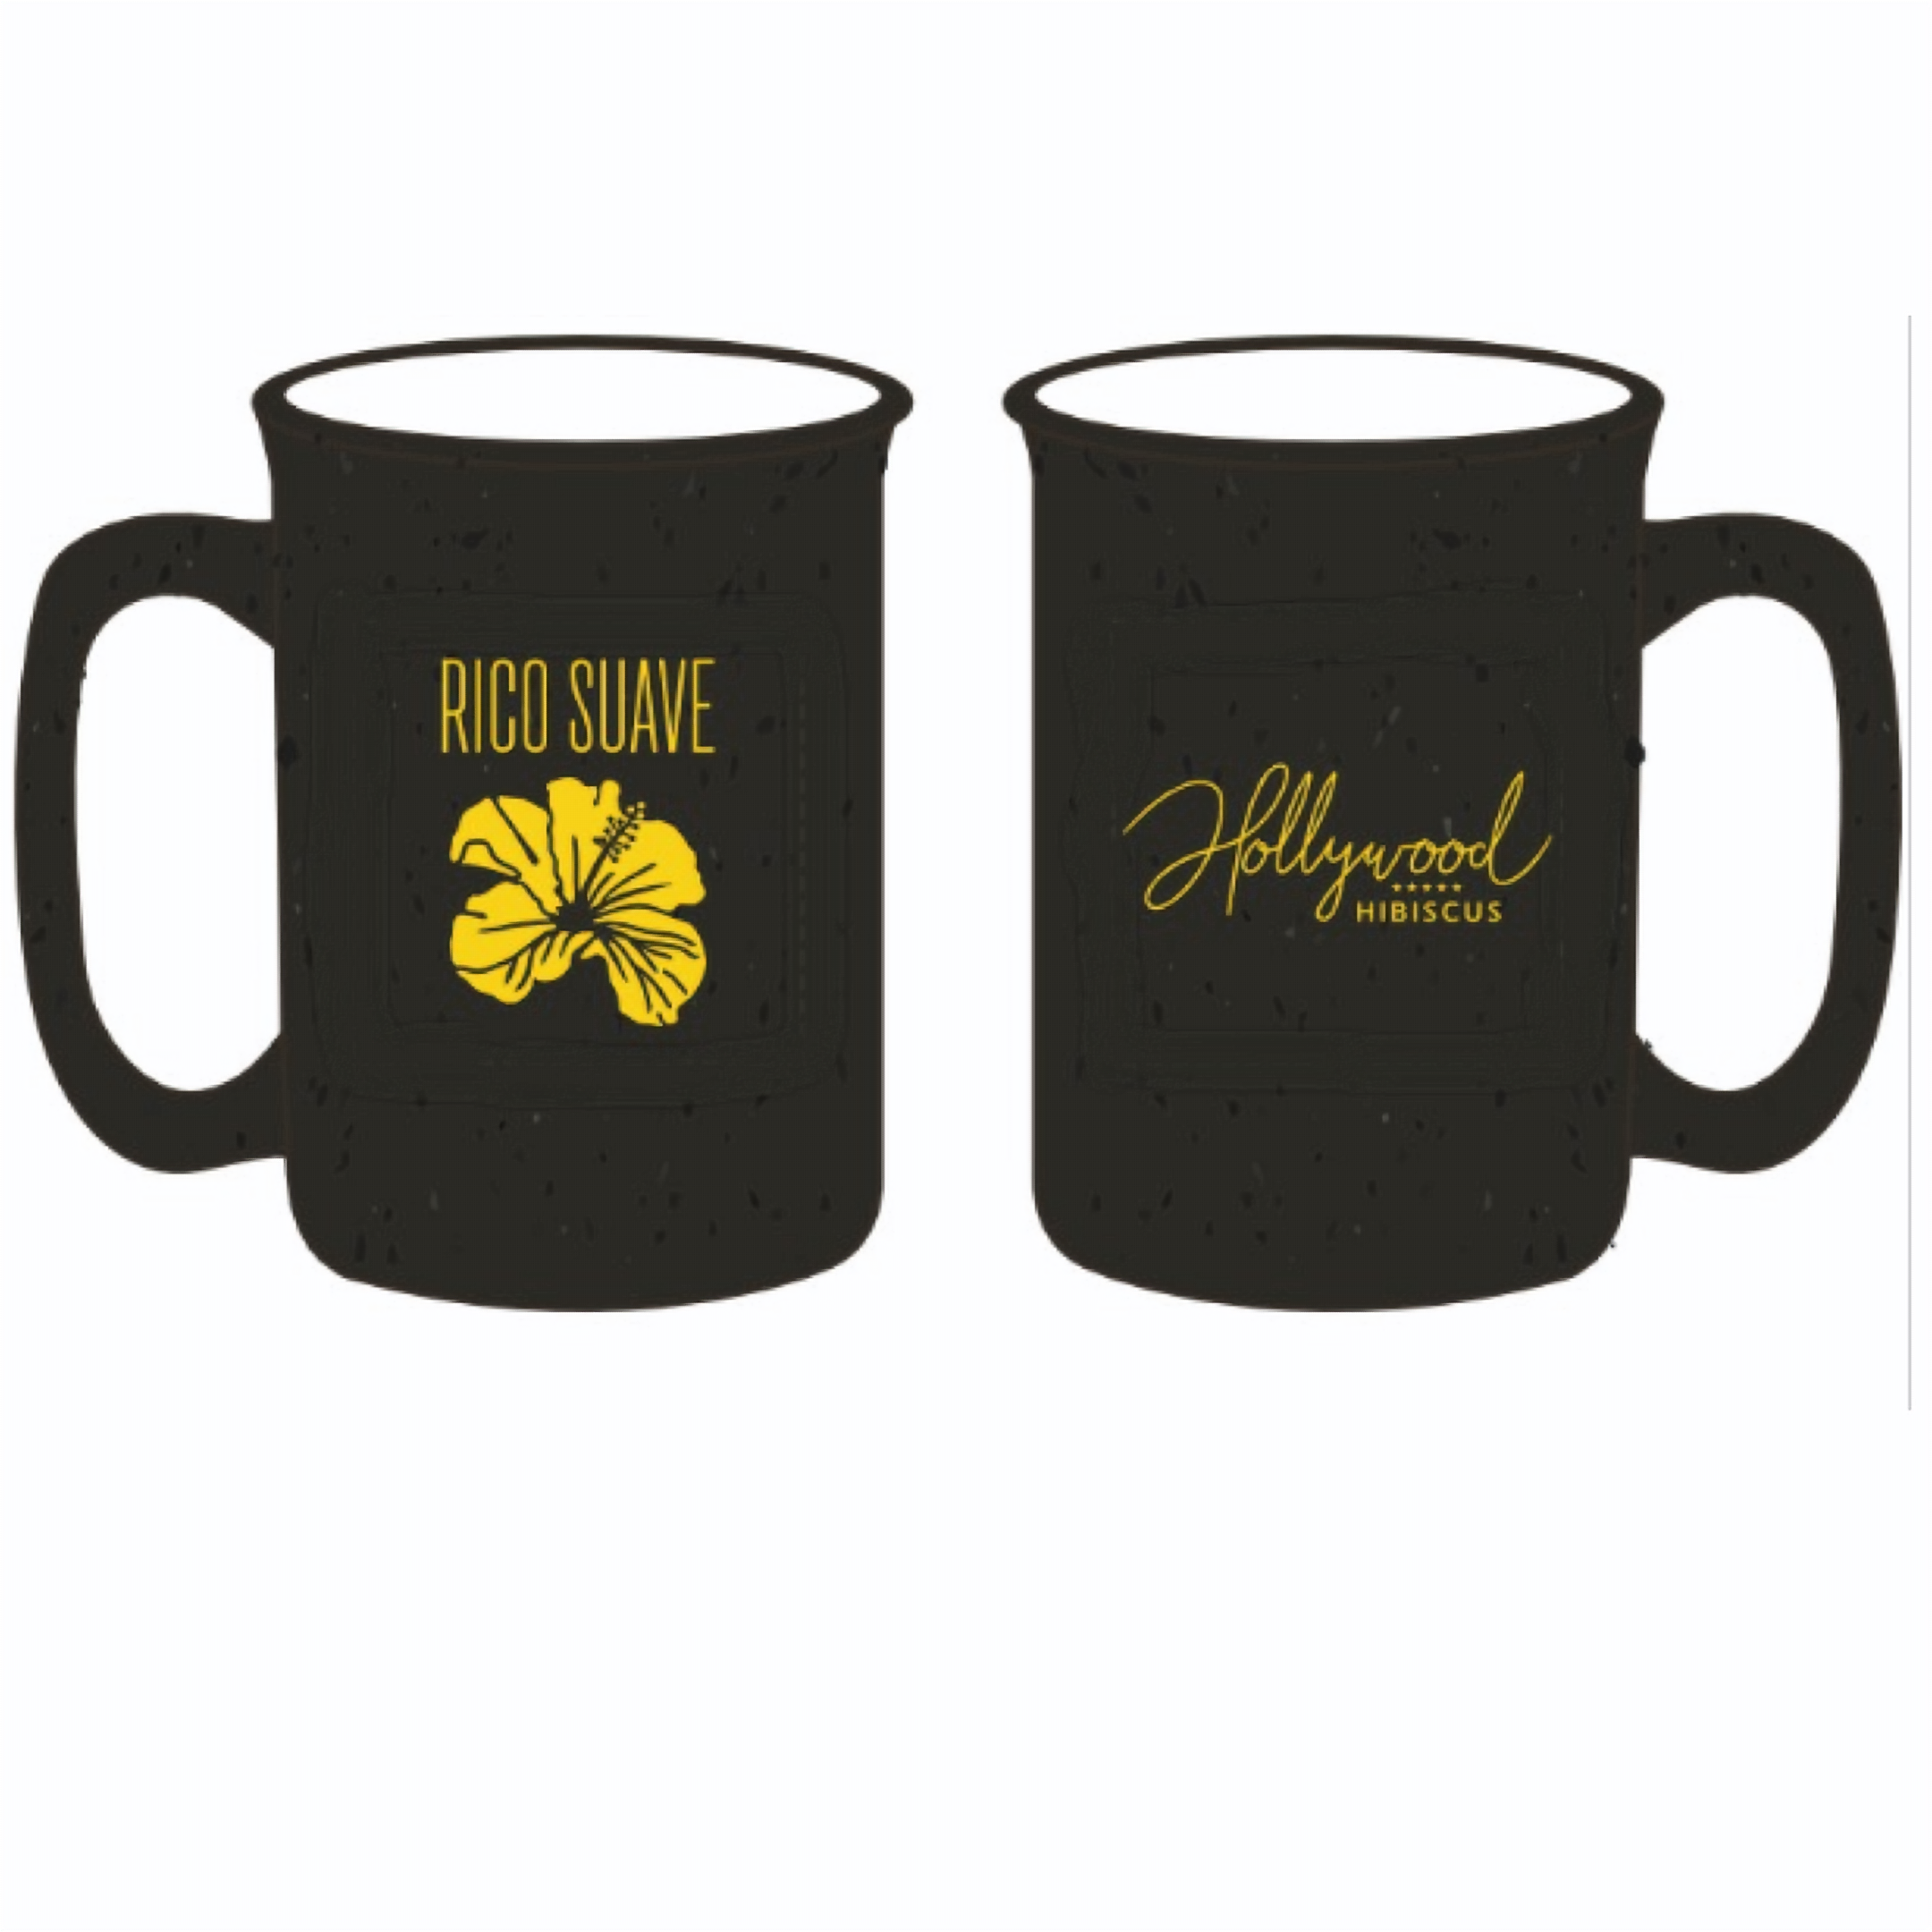 12 oz. Rico Suave Hollywood Hibiscus Coffee Cup